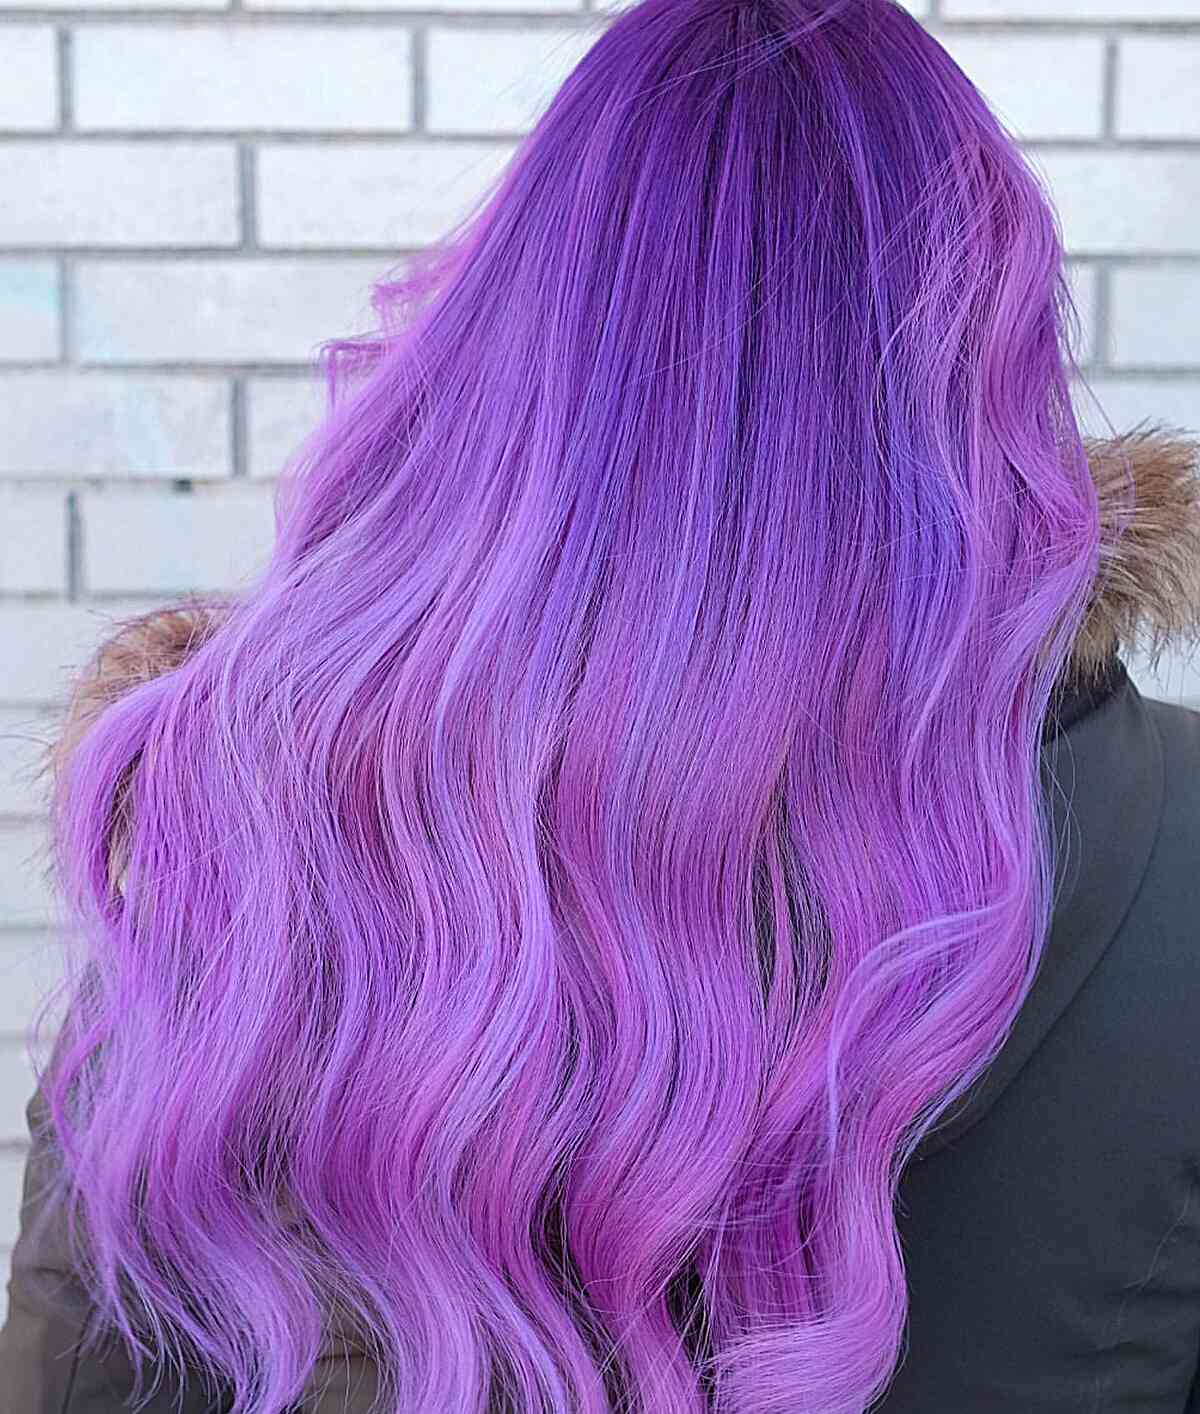 Vivid Pastel Purple Hairstyle for women with long straight hair